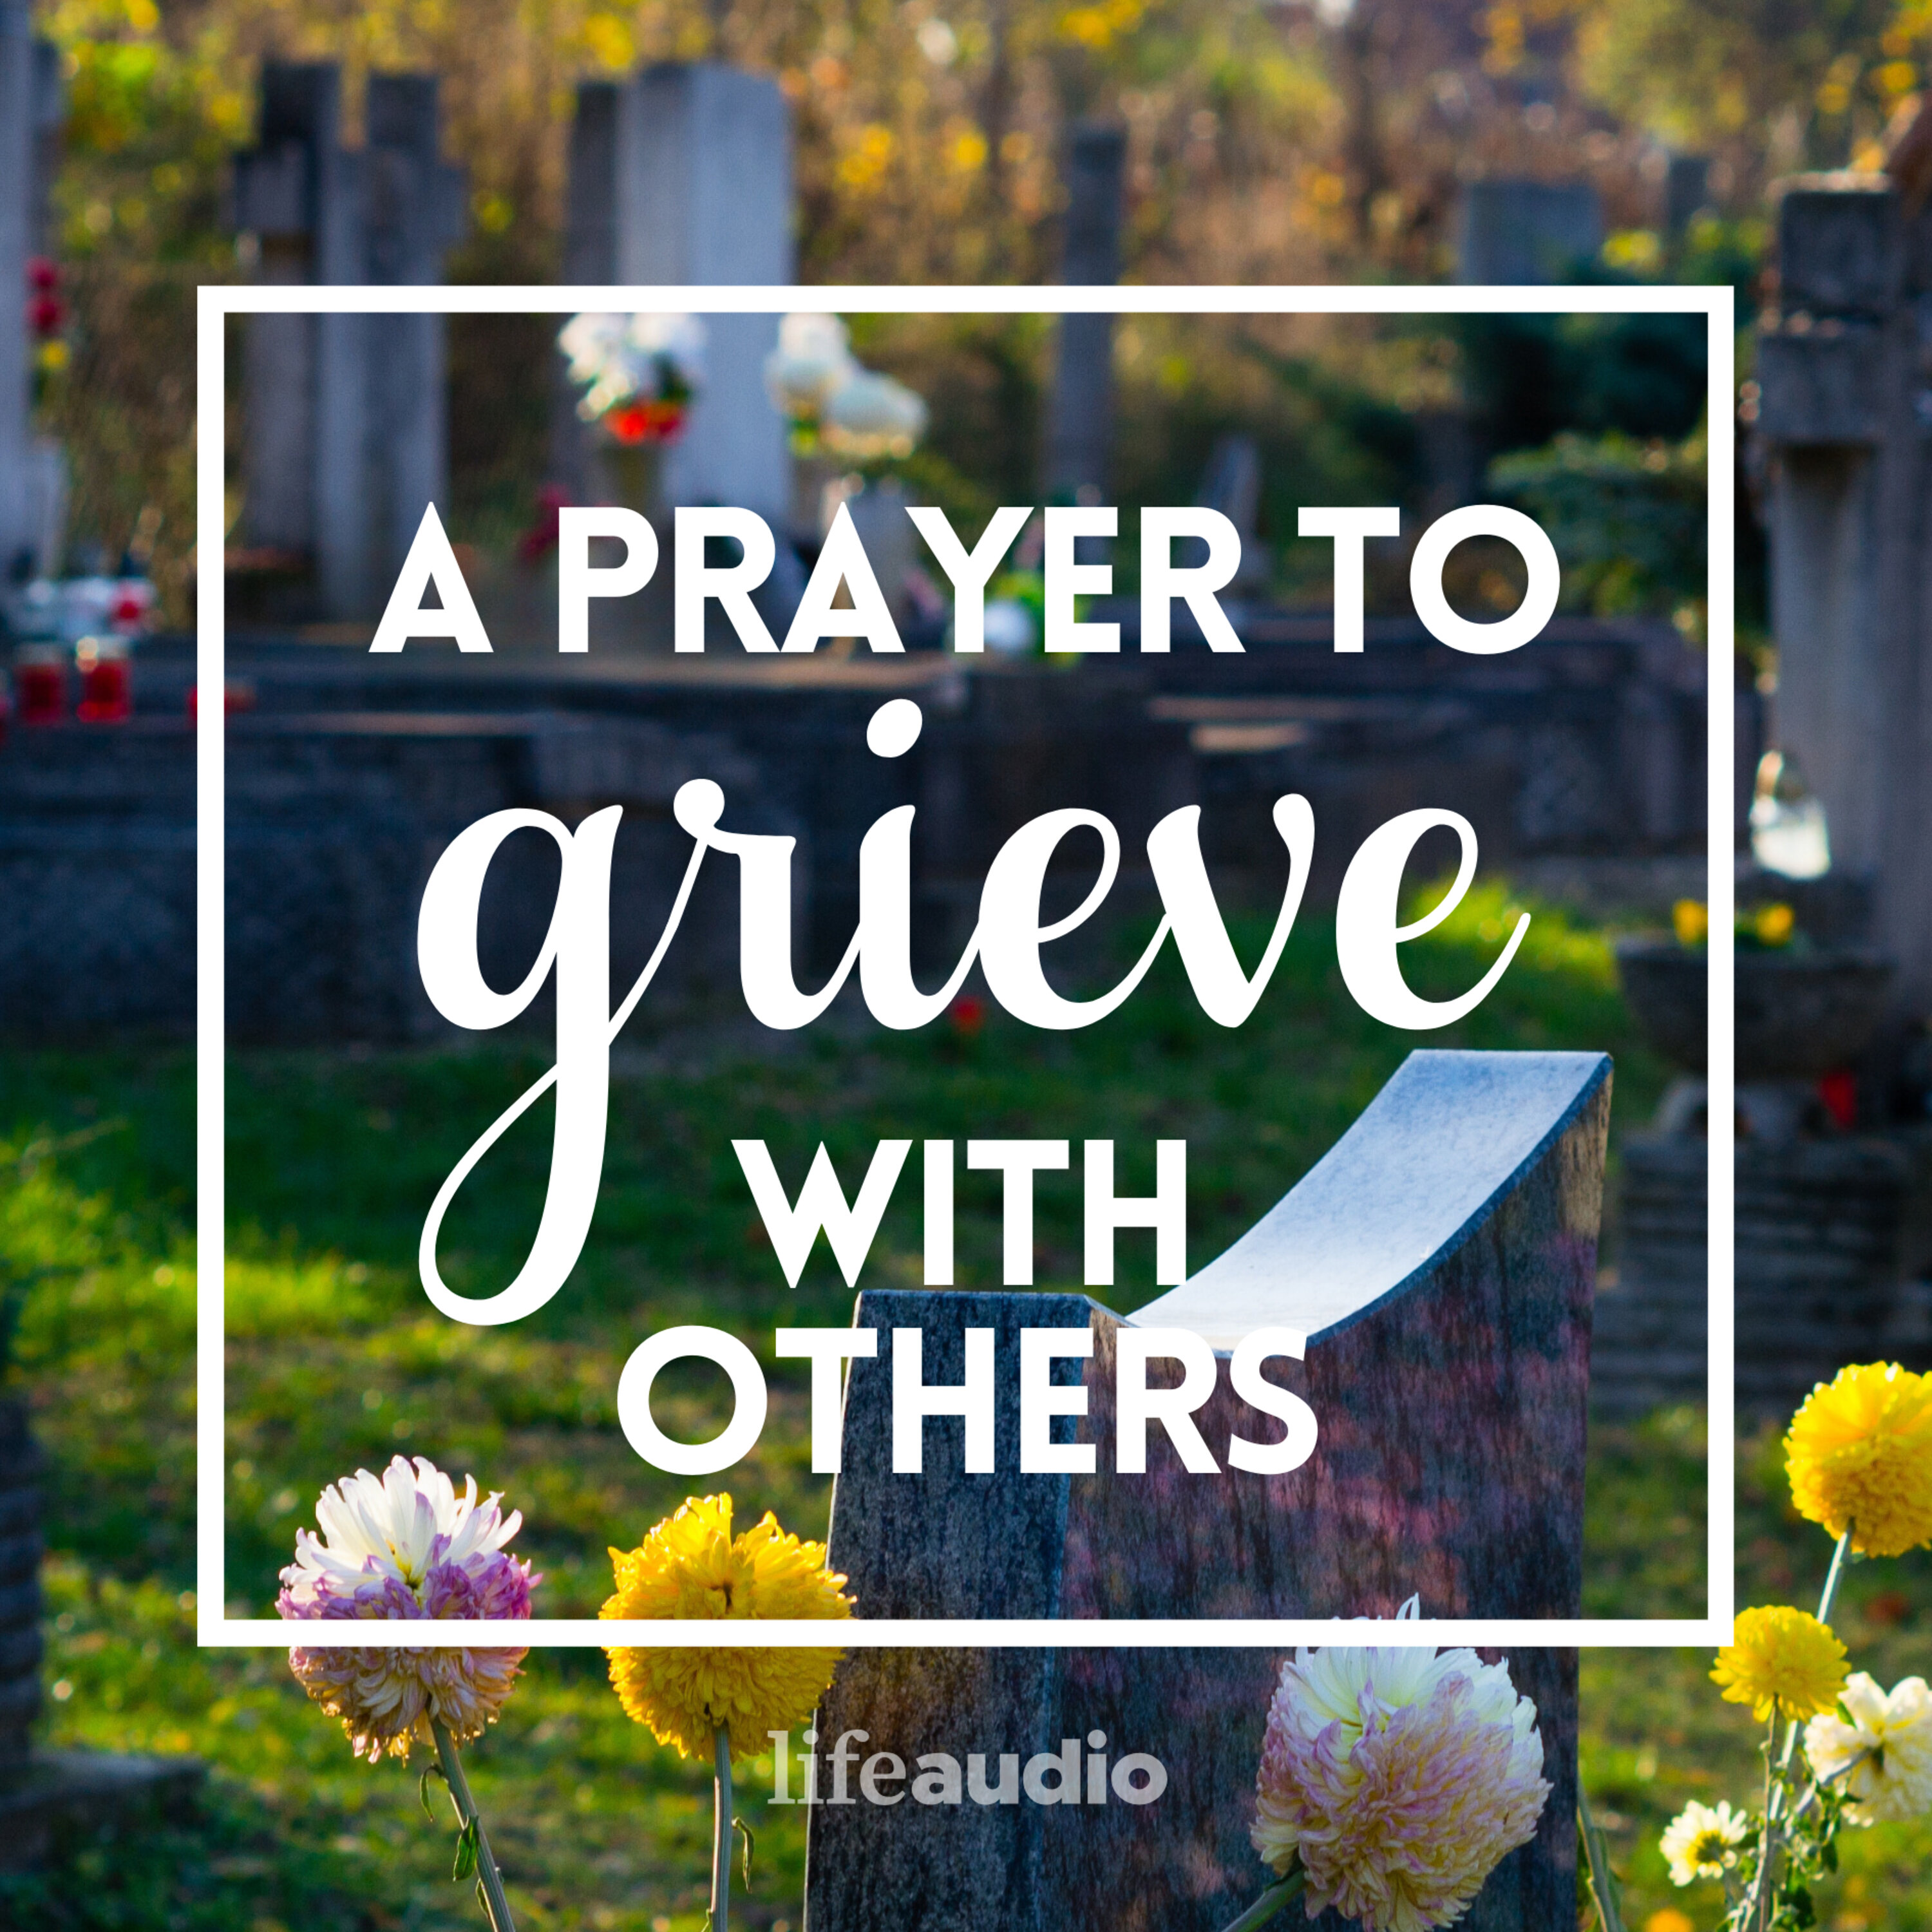 A Prayer to Grieve with Others